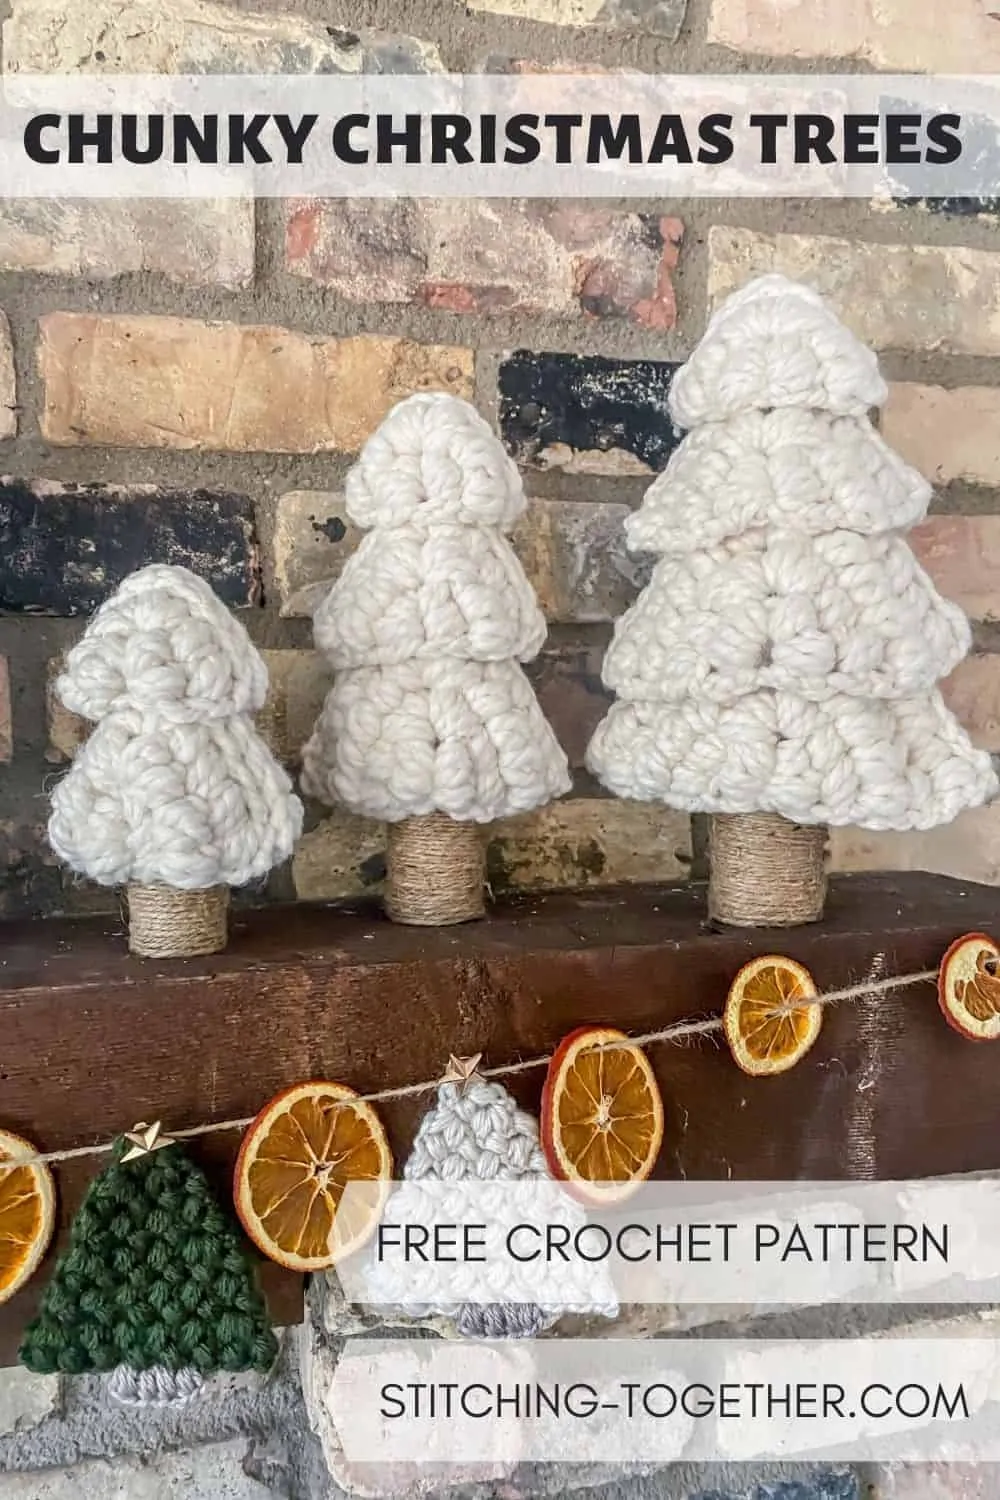 pin image of 3 white crochet christmas trees on a mantle